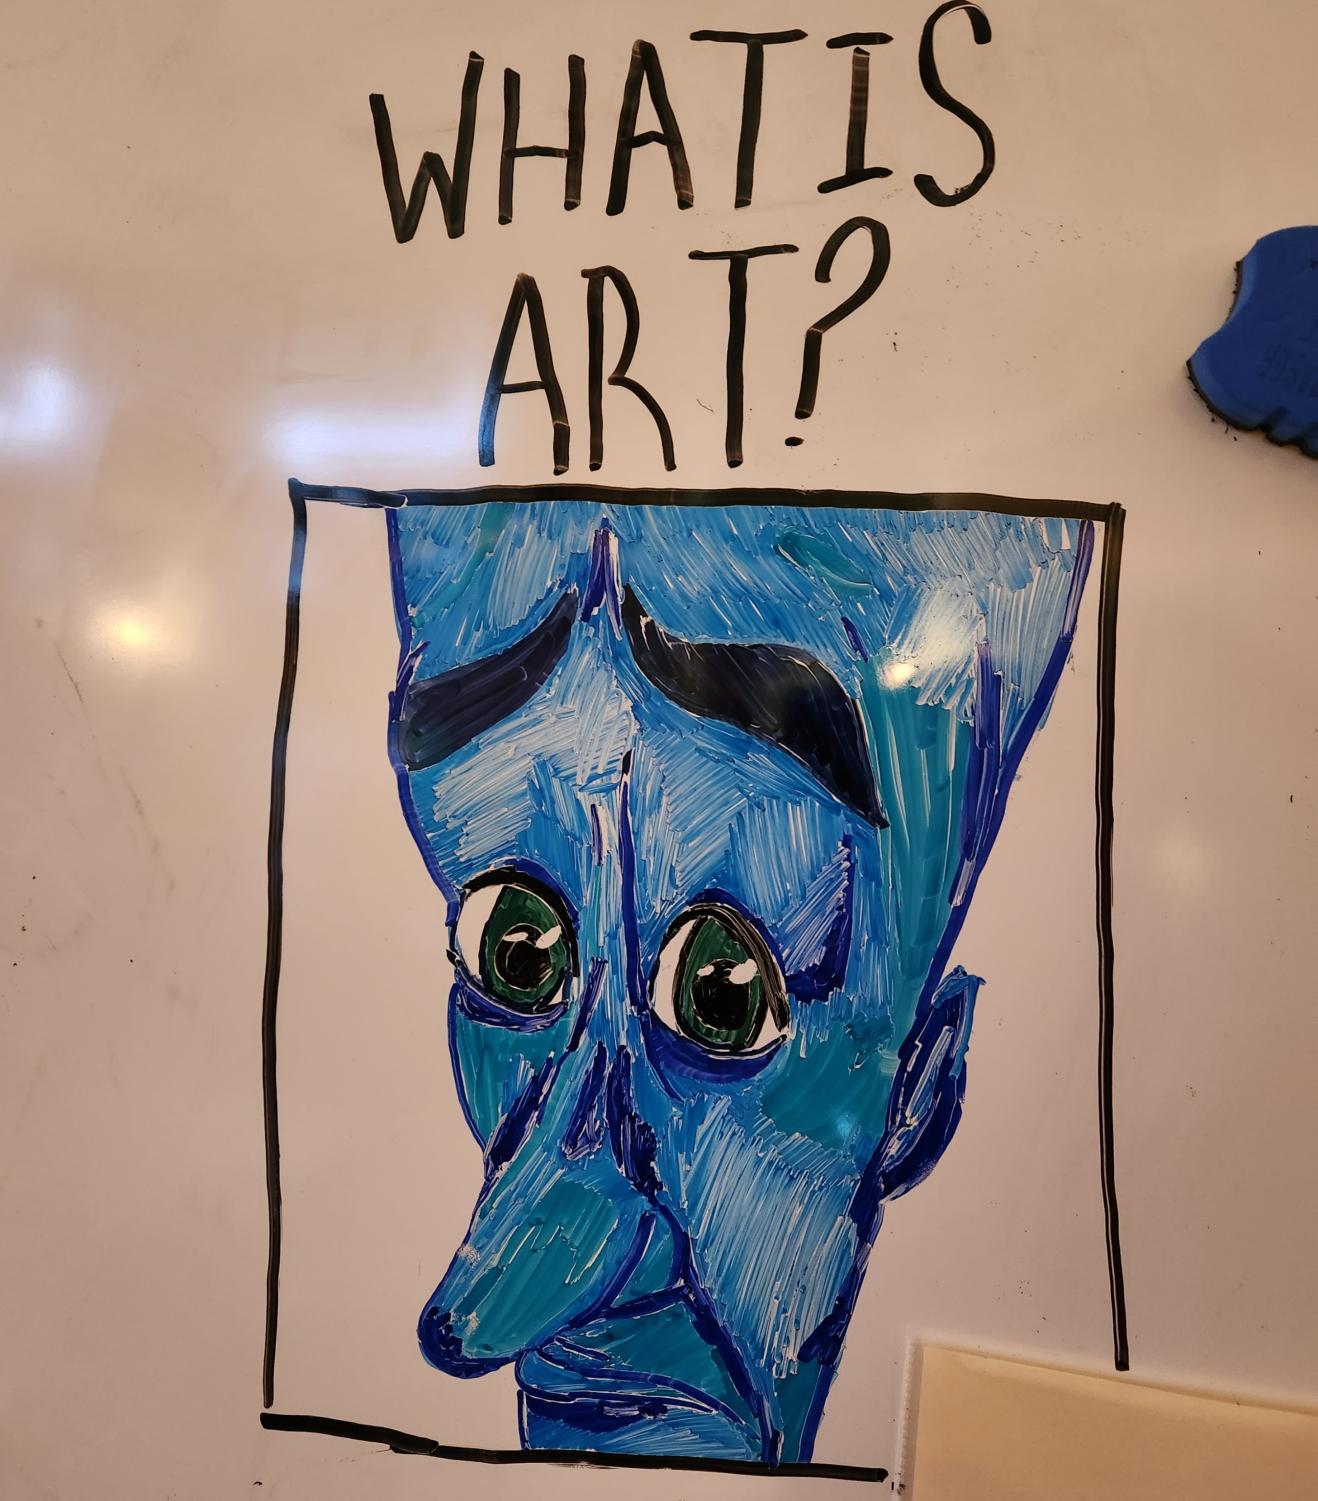 Picture of Megamind meme white board drawing.